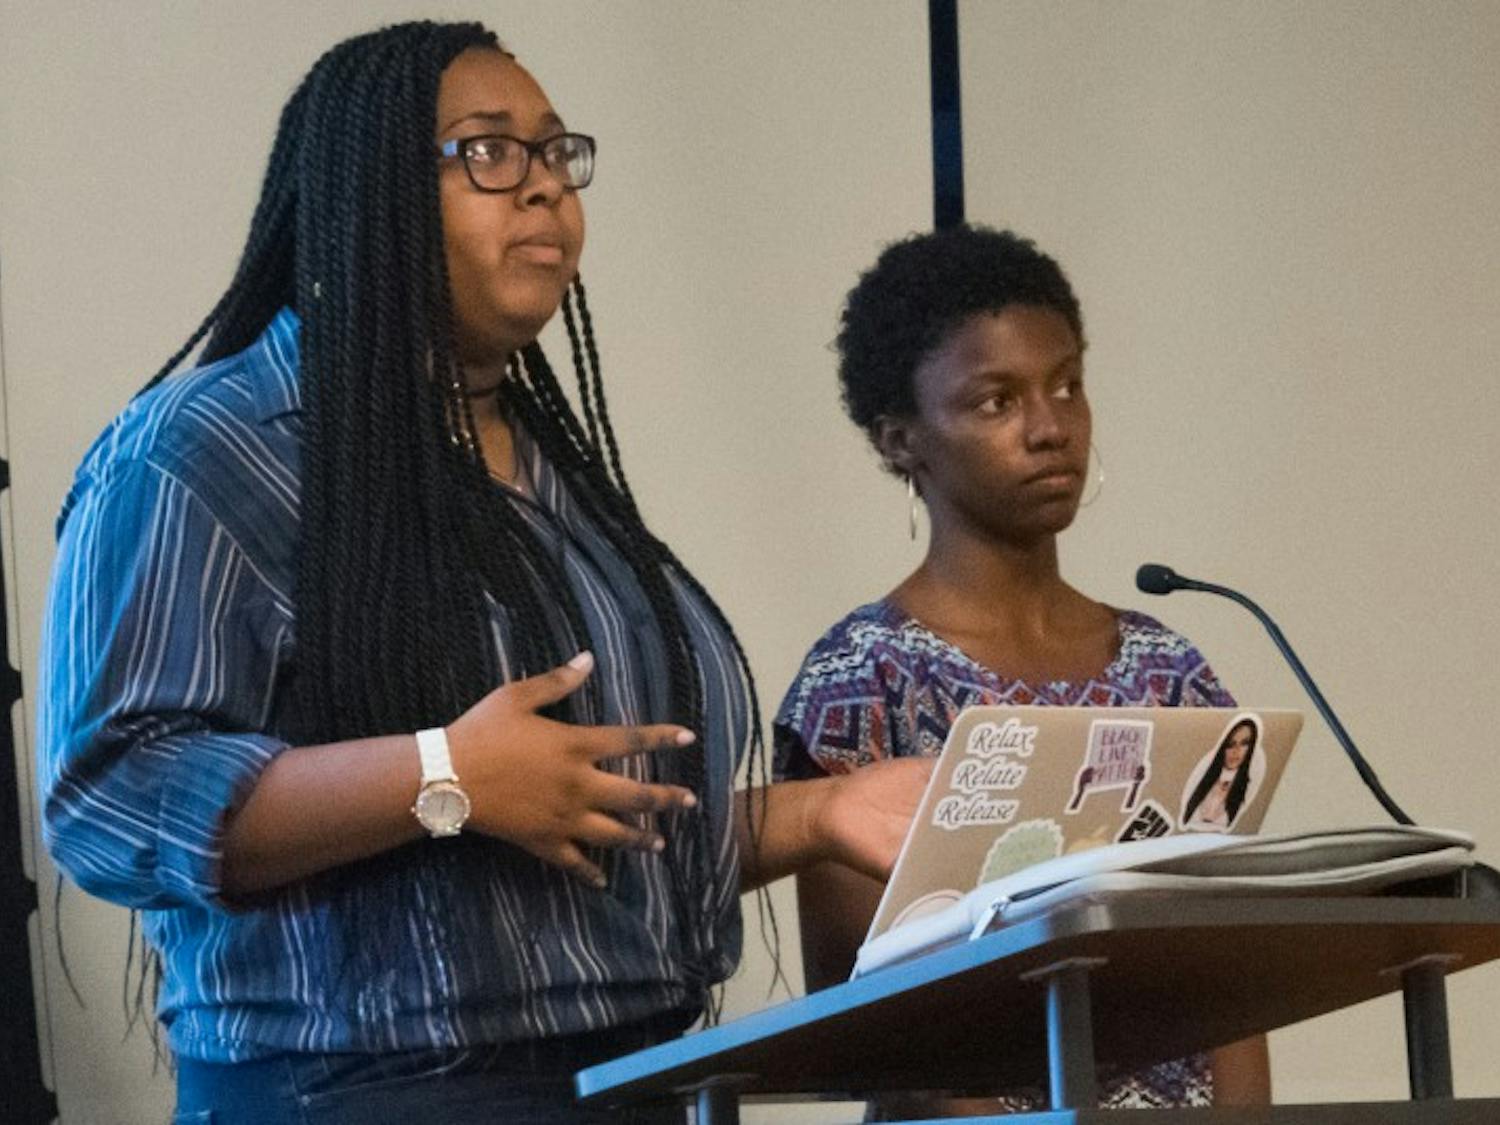 SSFC considers Wisconsin Black Student Union’s request for funds